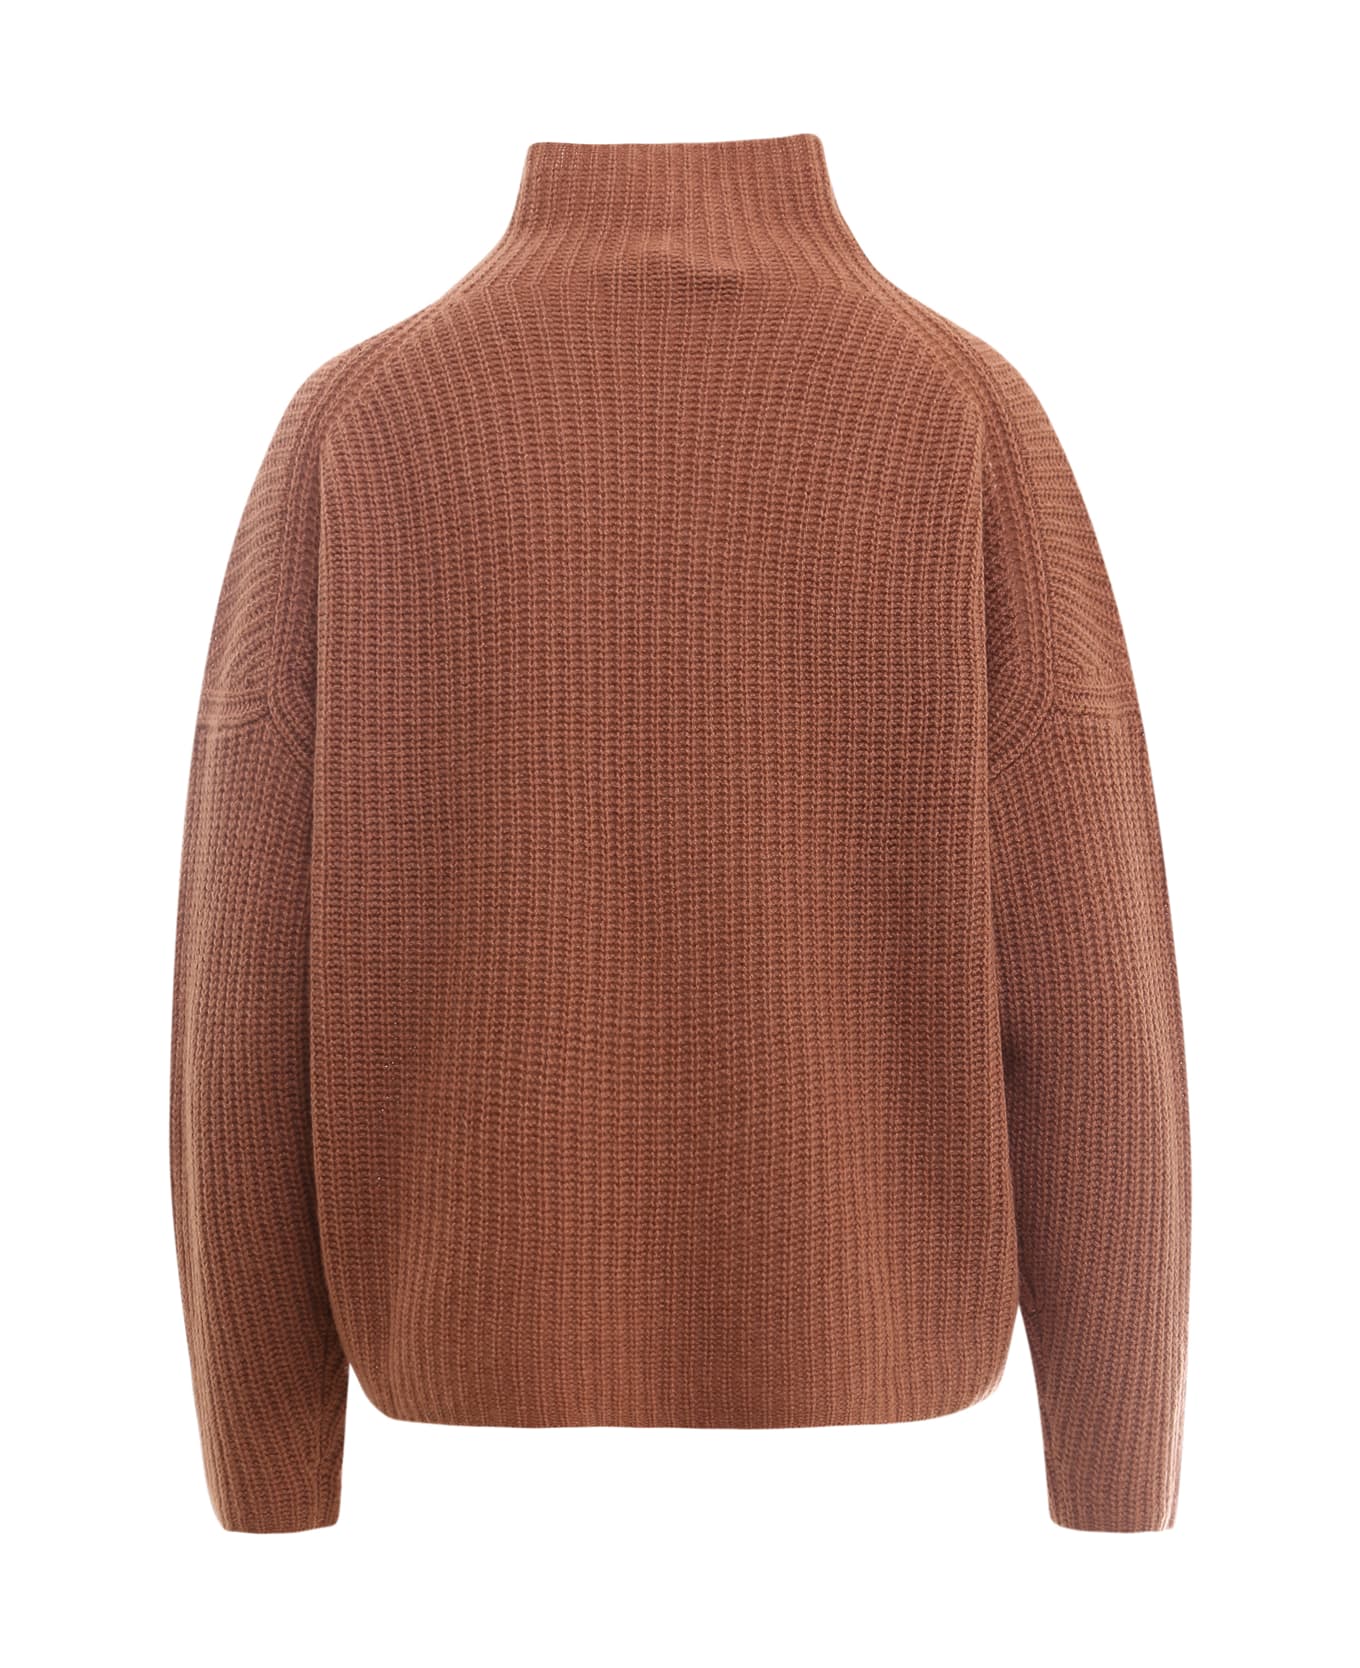 360Cashmere Sweater - Brown